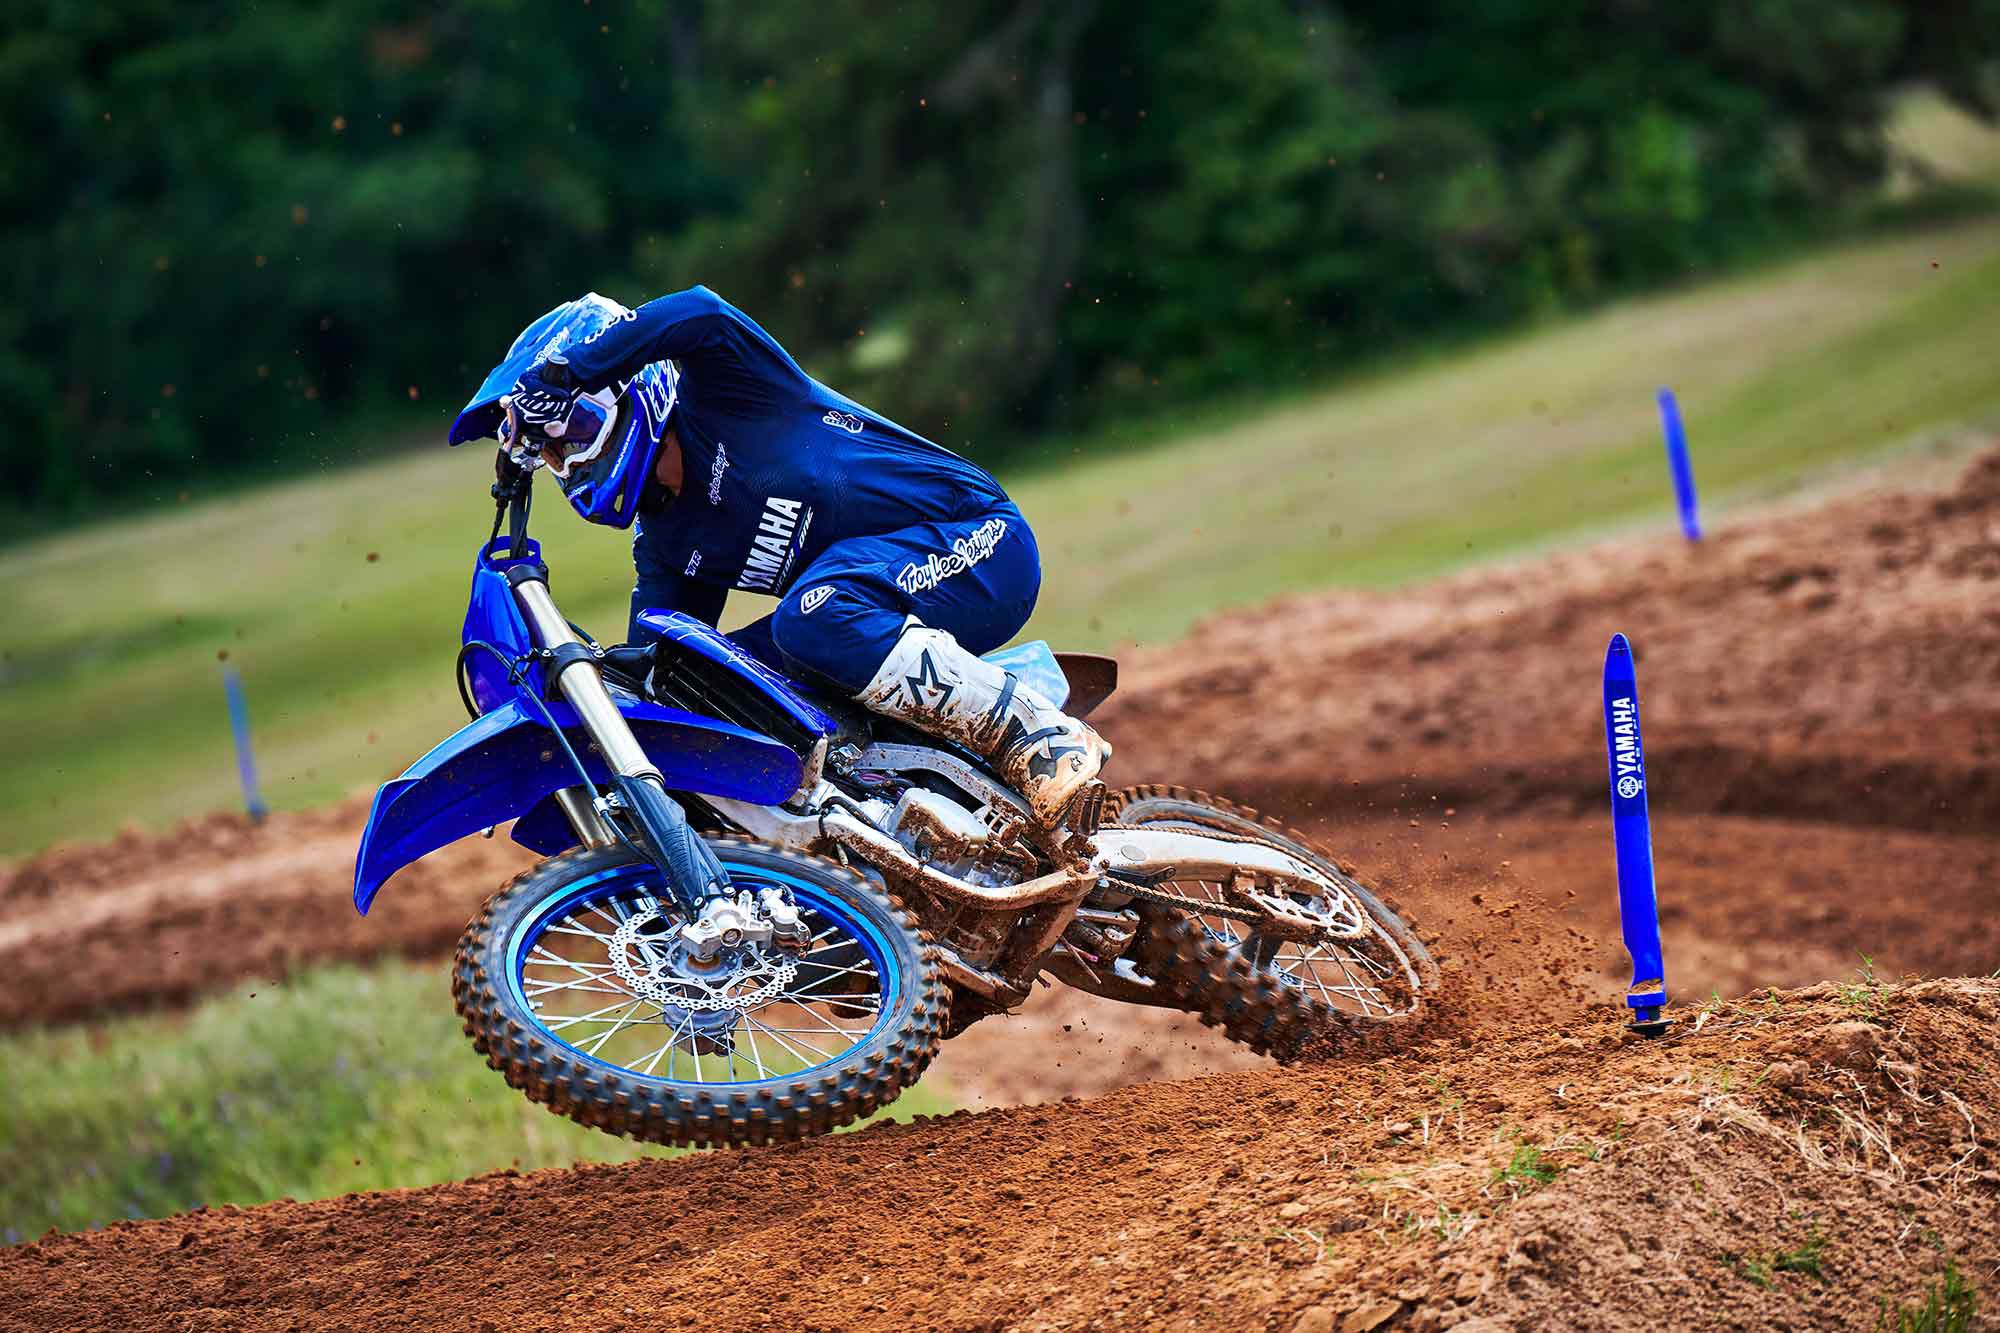 The 125cc two-stroke provides more power, particularly in the mid-and-high-rpm ranges.